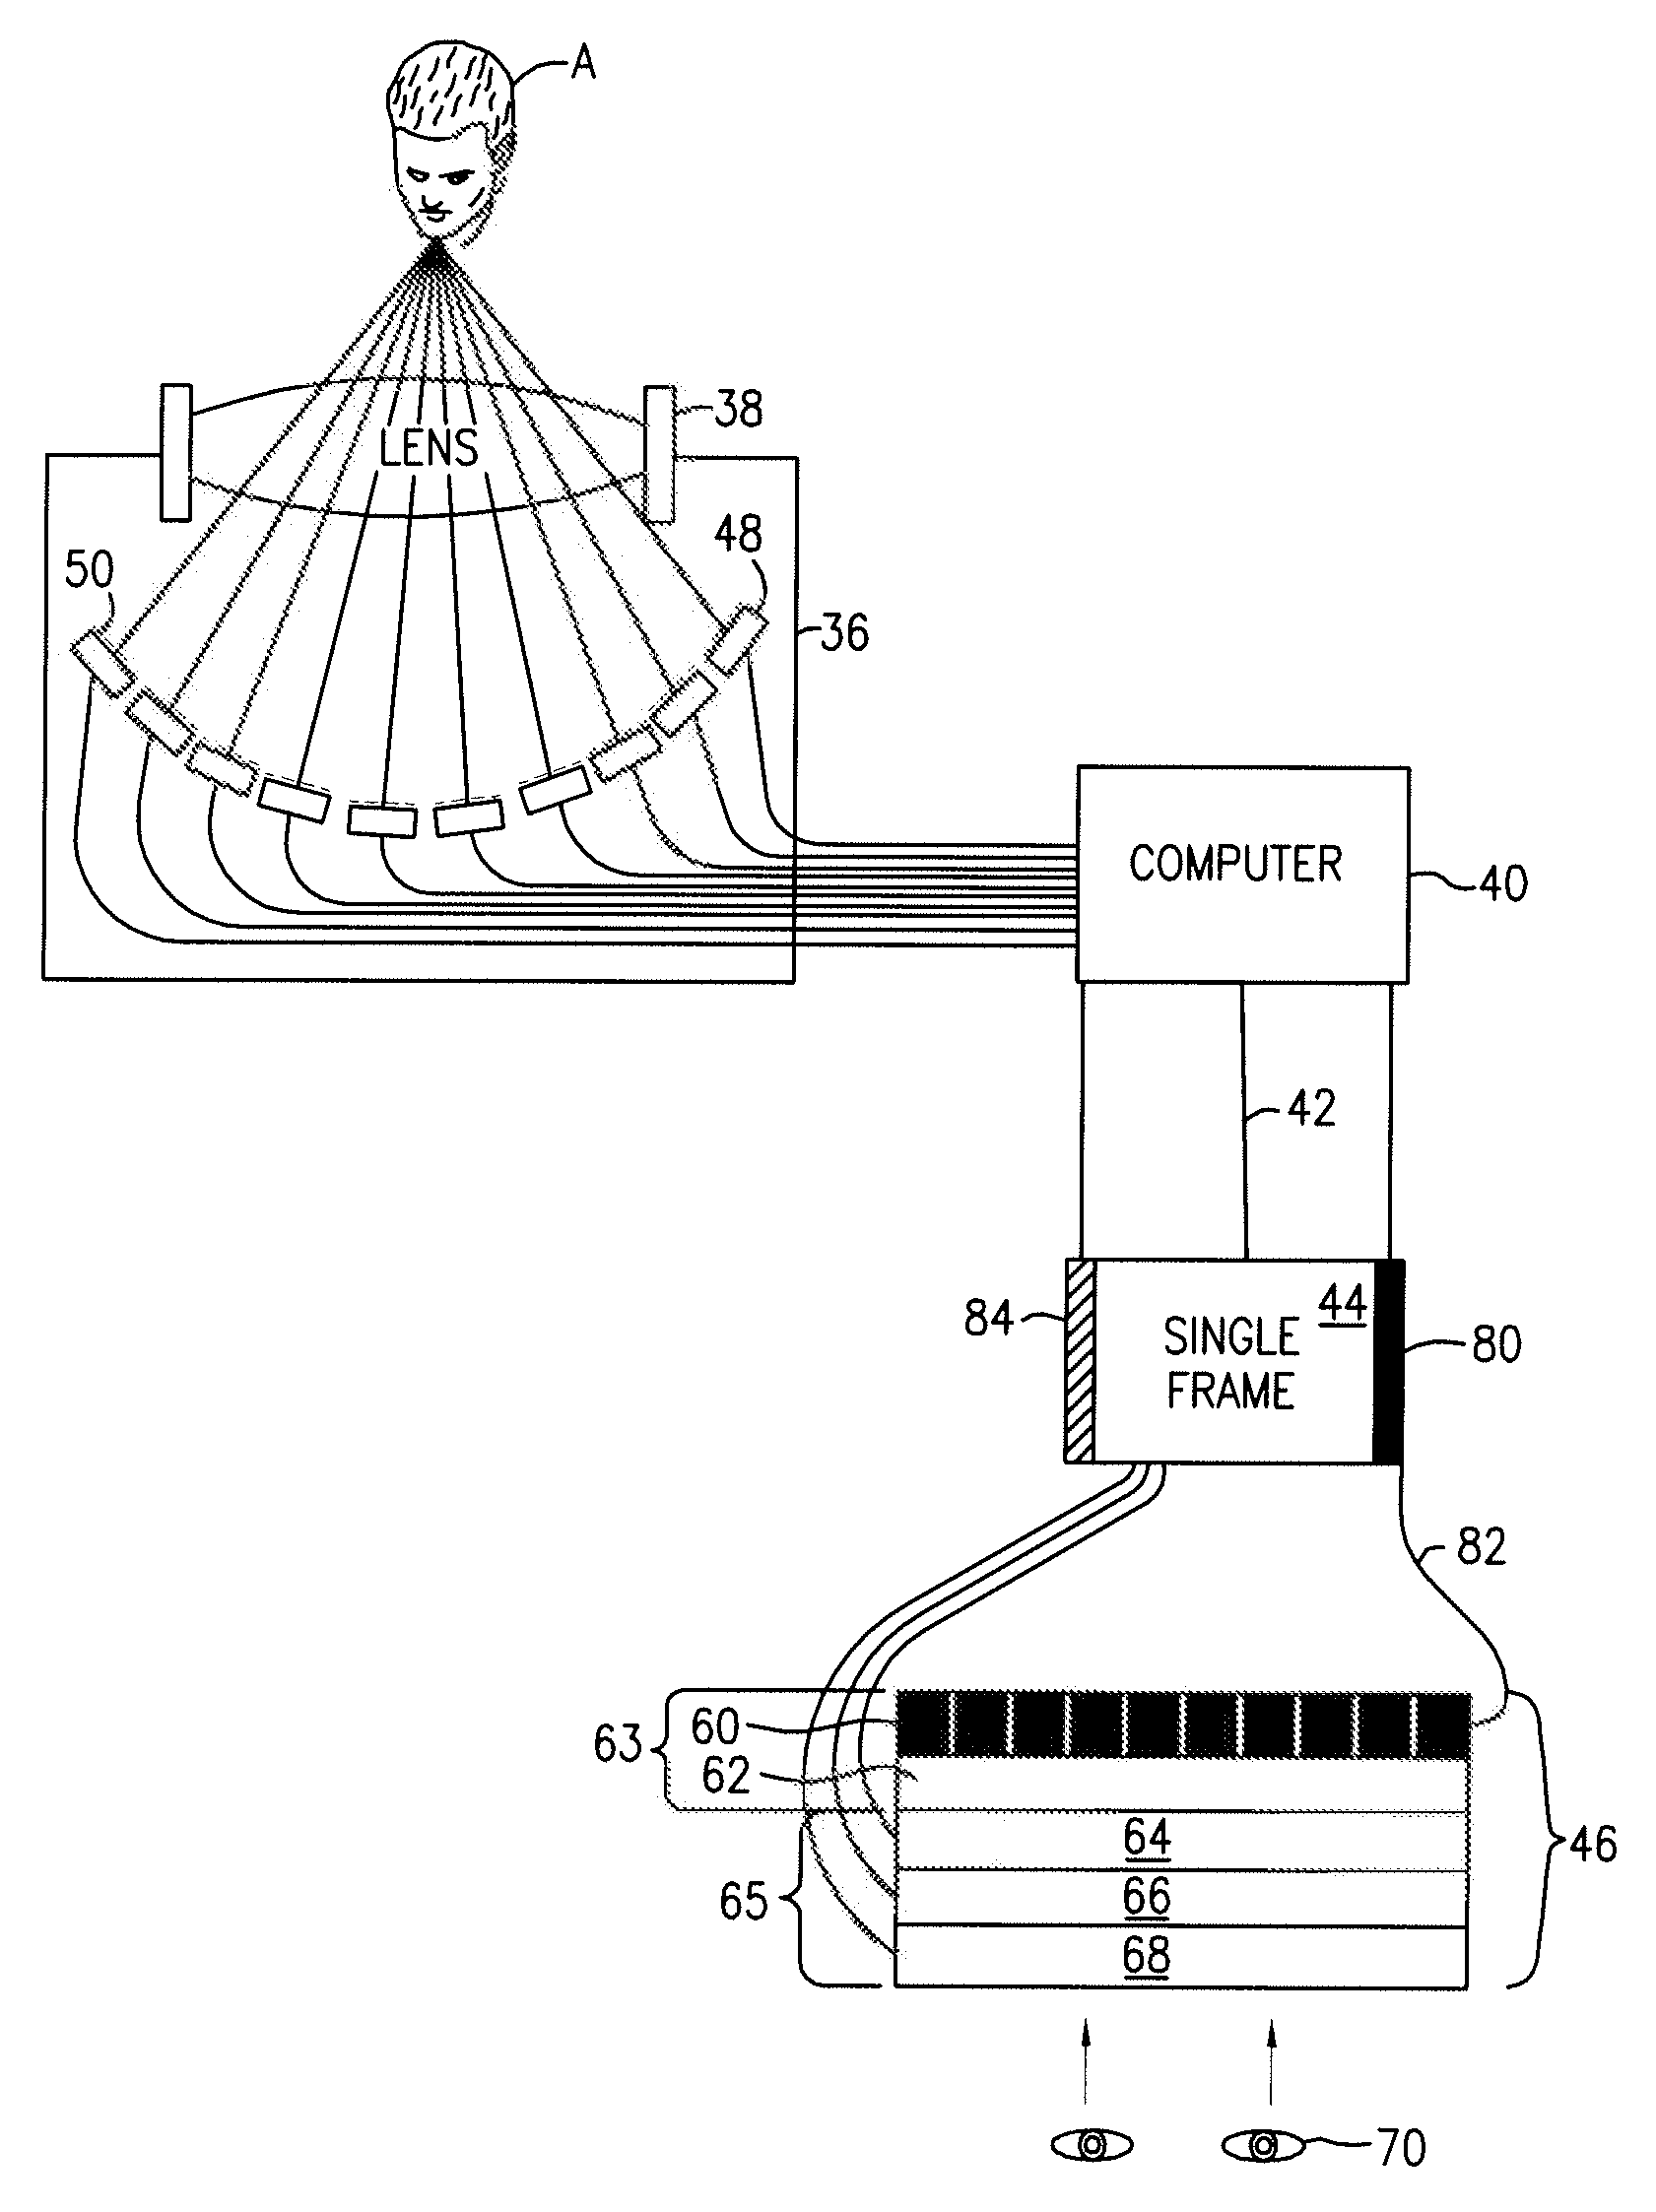 Advance in Transmission and Display of Multi-Dimensional Images for Digital Monitors and Television Receivers using a virtual lens